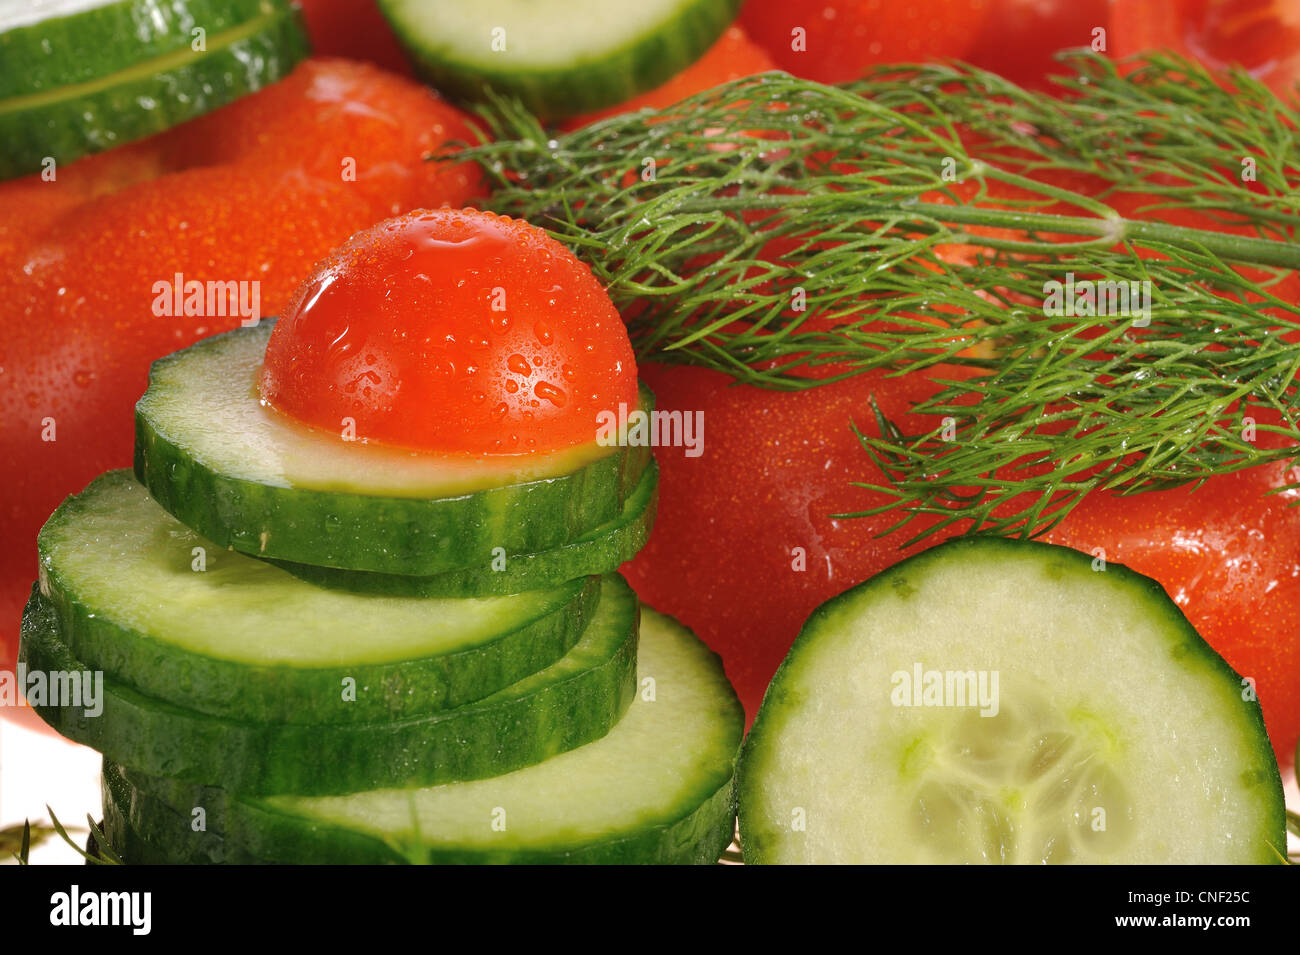 tomatoes, cucumbers and dill Stock Photo